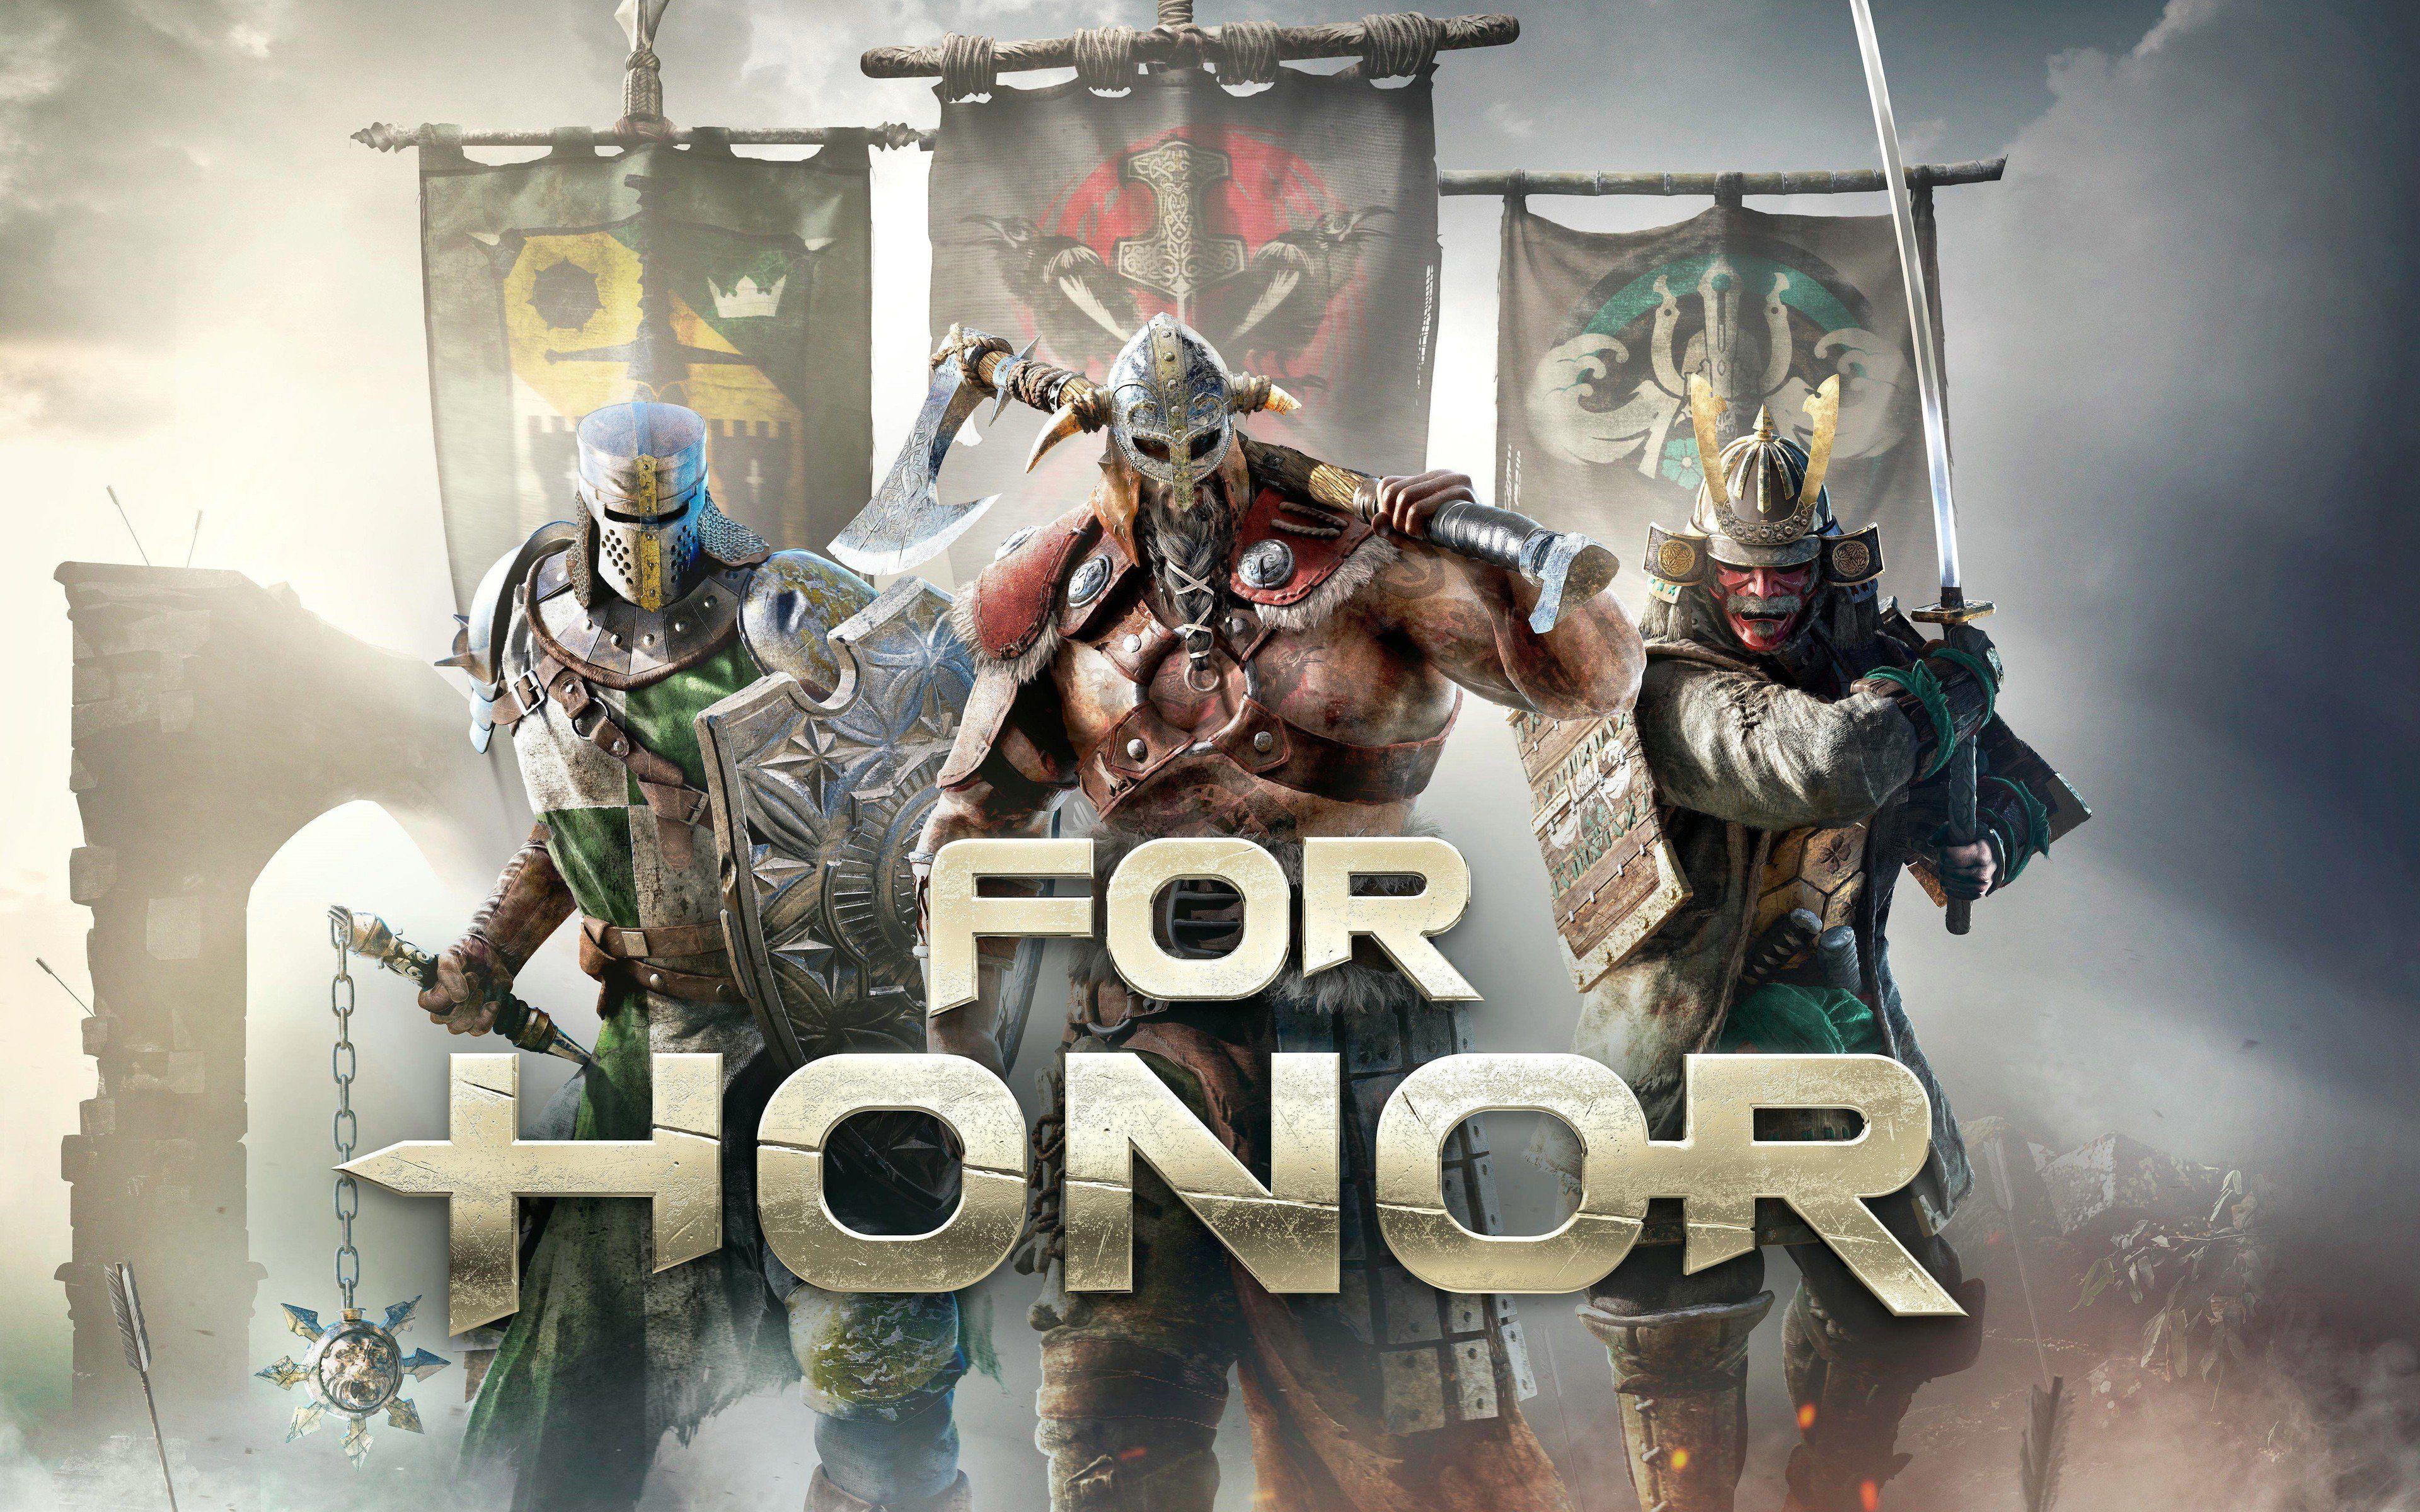 download for honor ps4